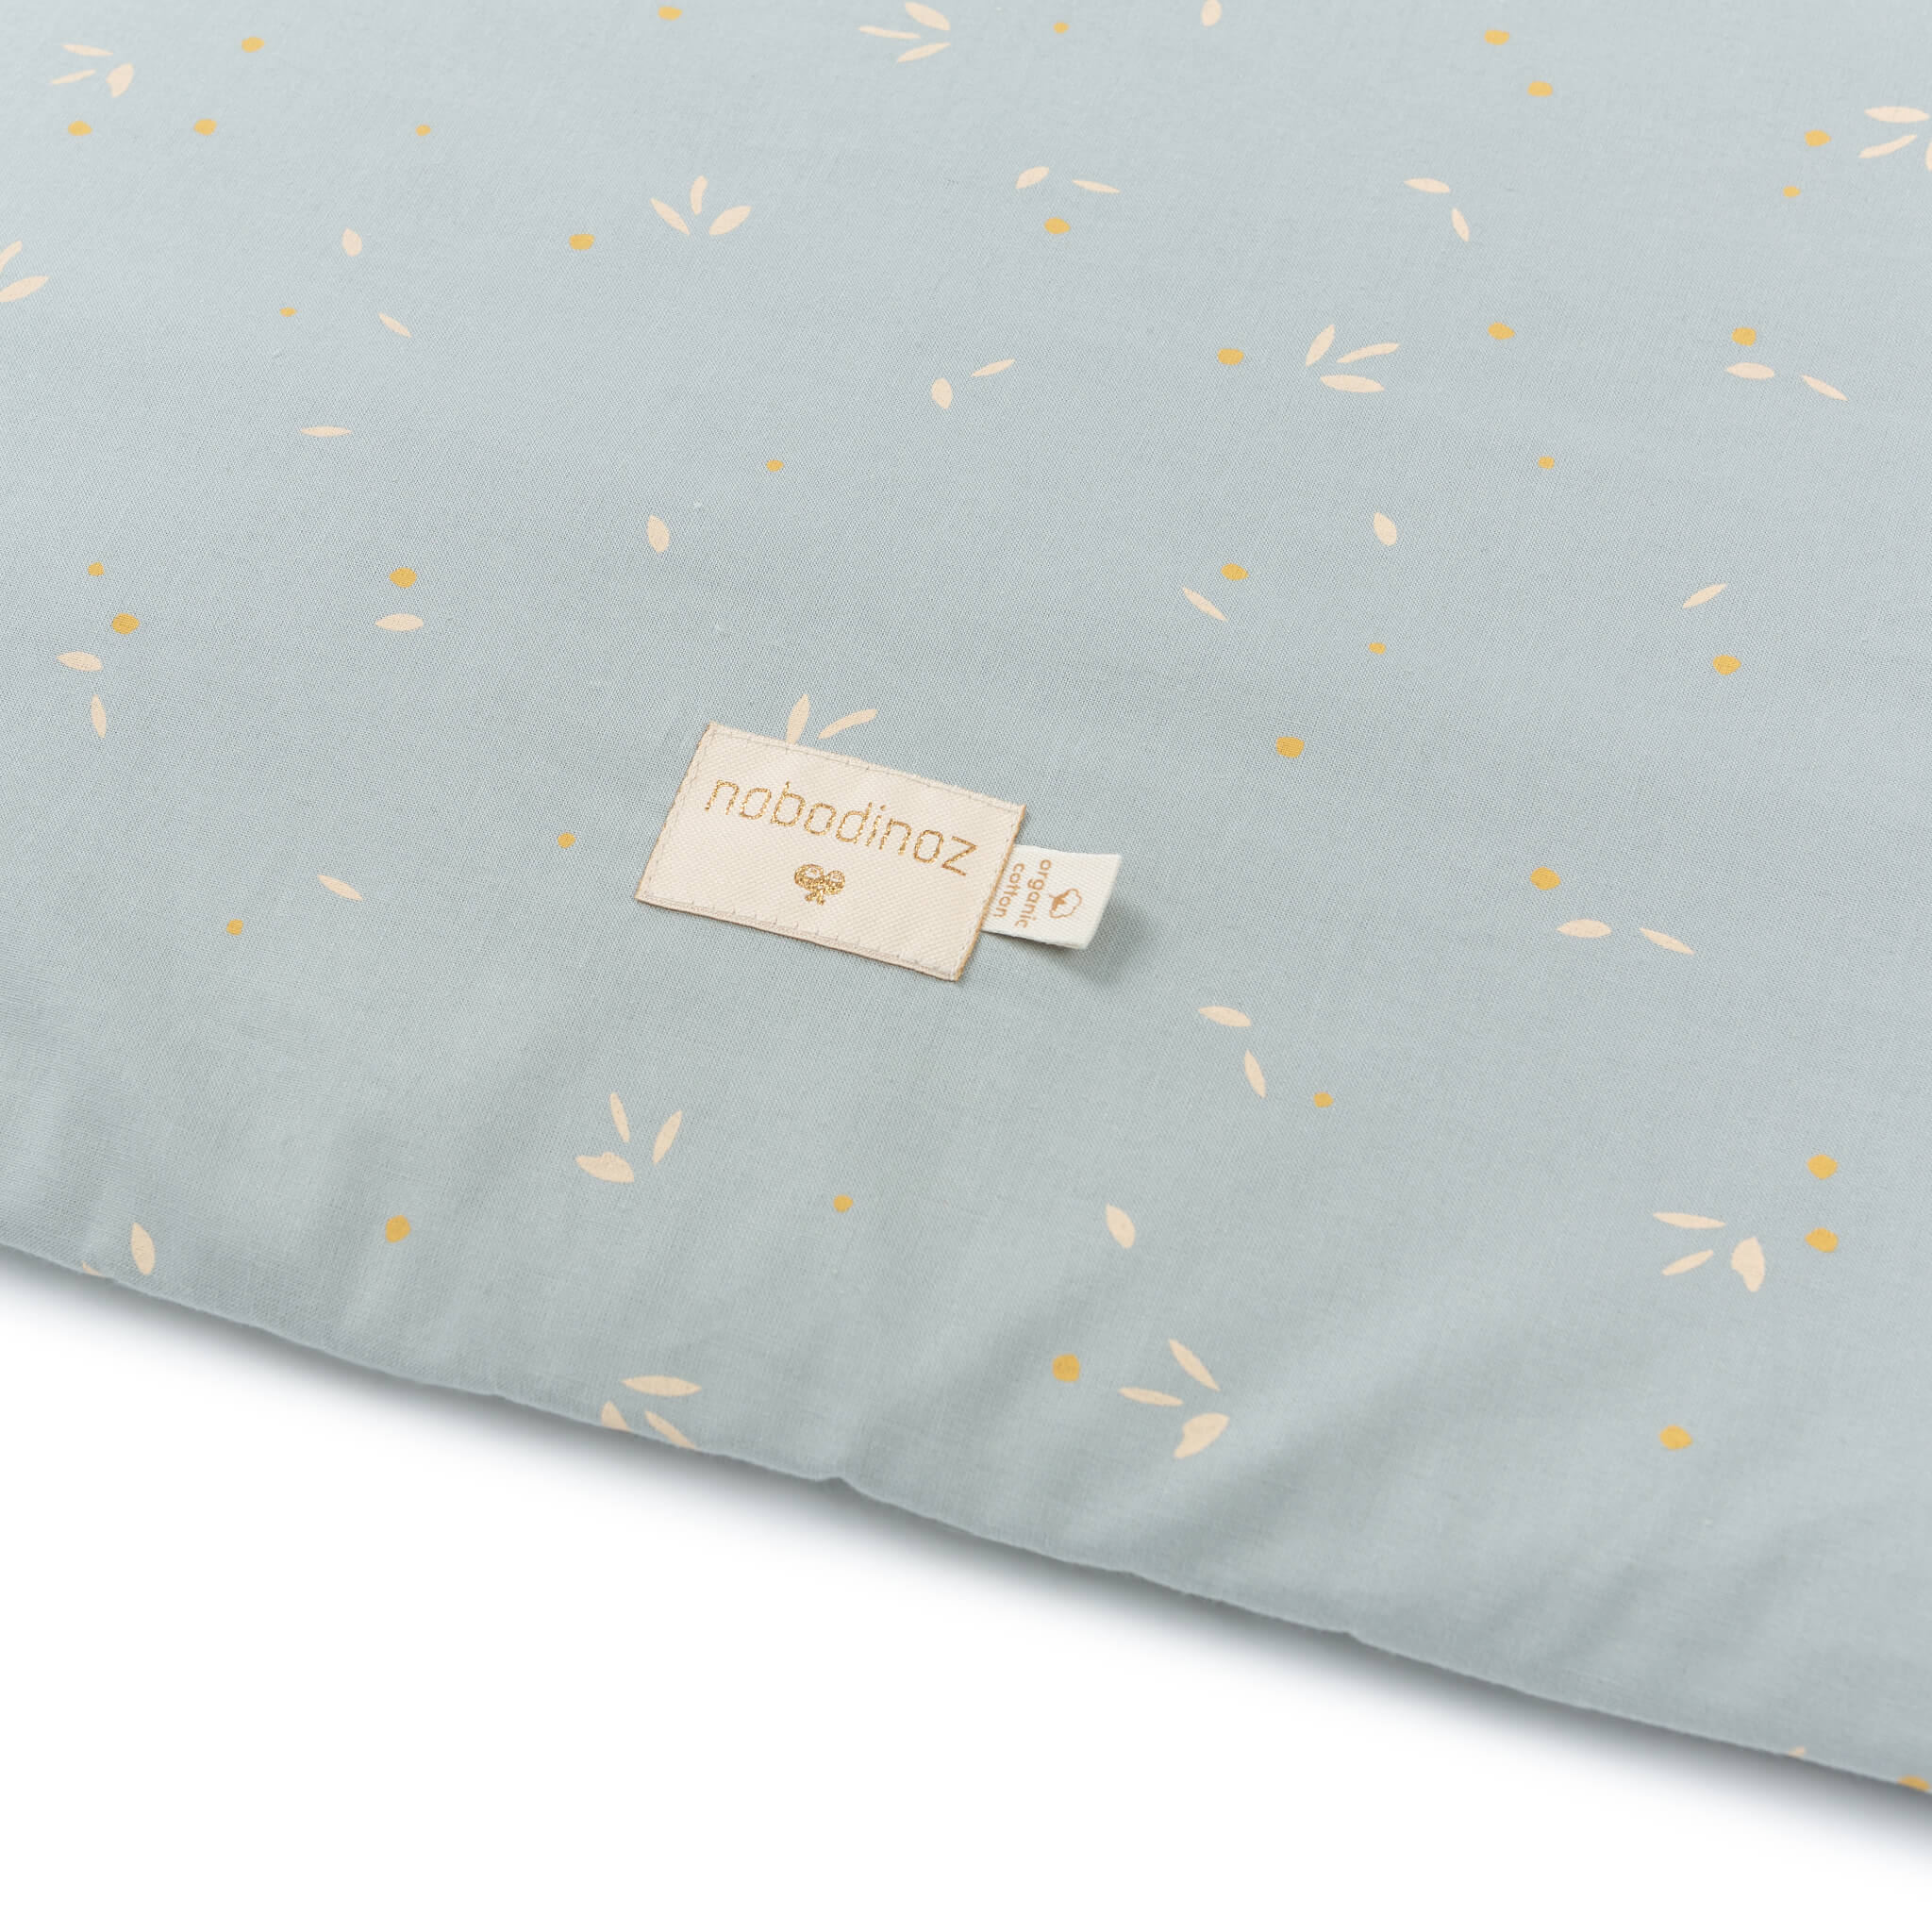 Nobodinoz Colorado Square Playmat in Willow Soft Blue Details